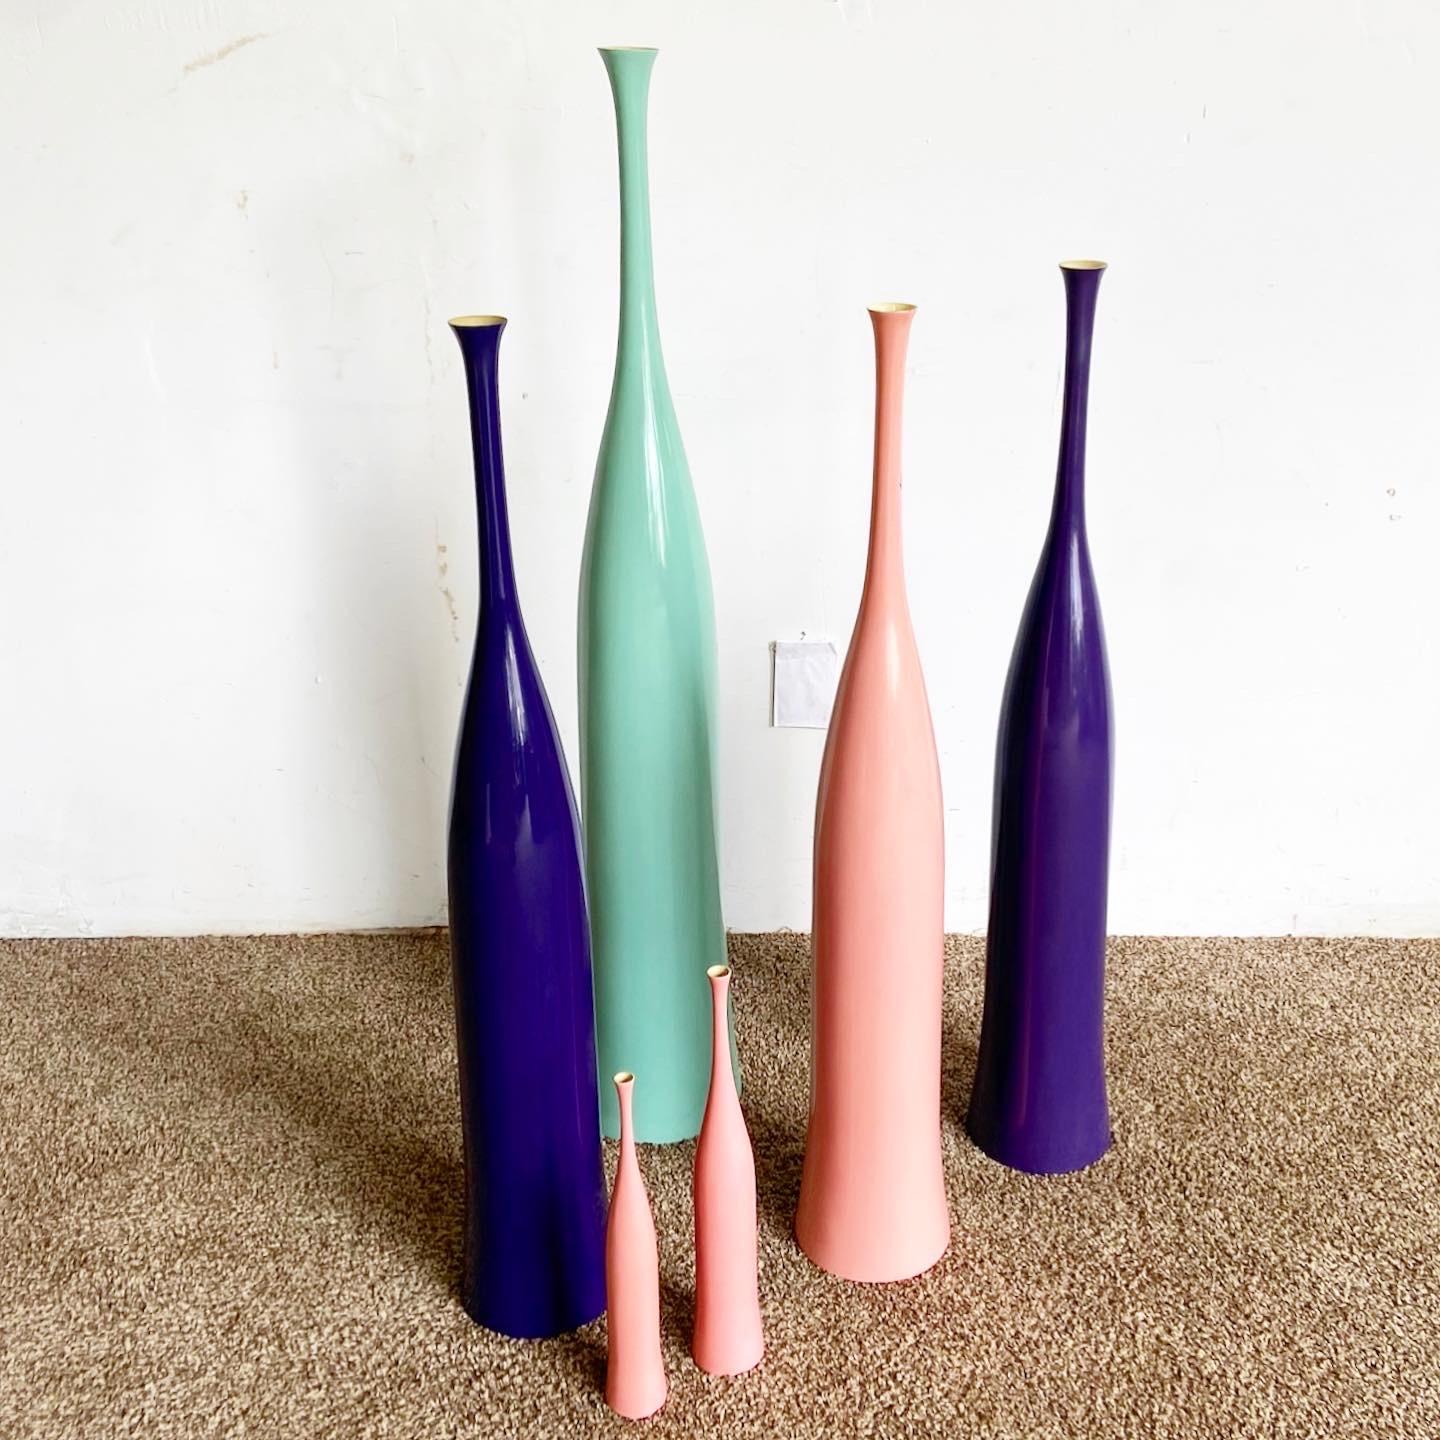 Add a pop of color to your decor with our set of six Postmodern vases by Oggetti, adorned in stunning pink, purple, and teal finishes.

Features a set of six Postmodern vases by Oggetti
Adorned in eye-catching pink, purple, and teal finishes
Varying